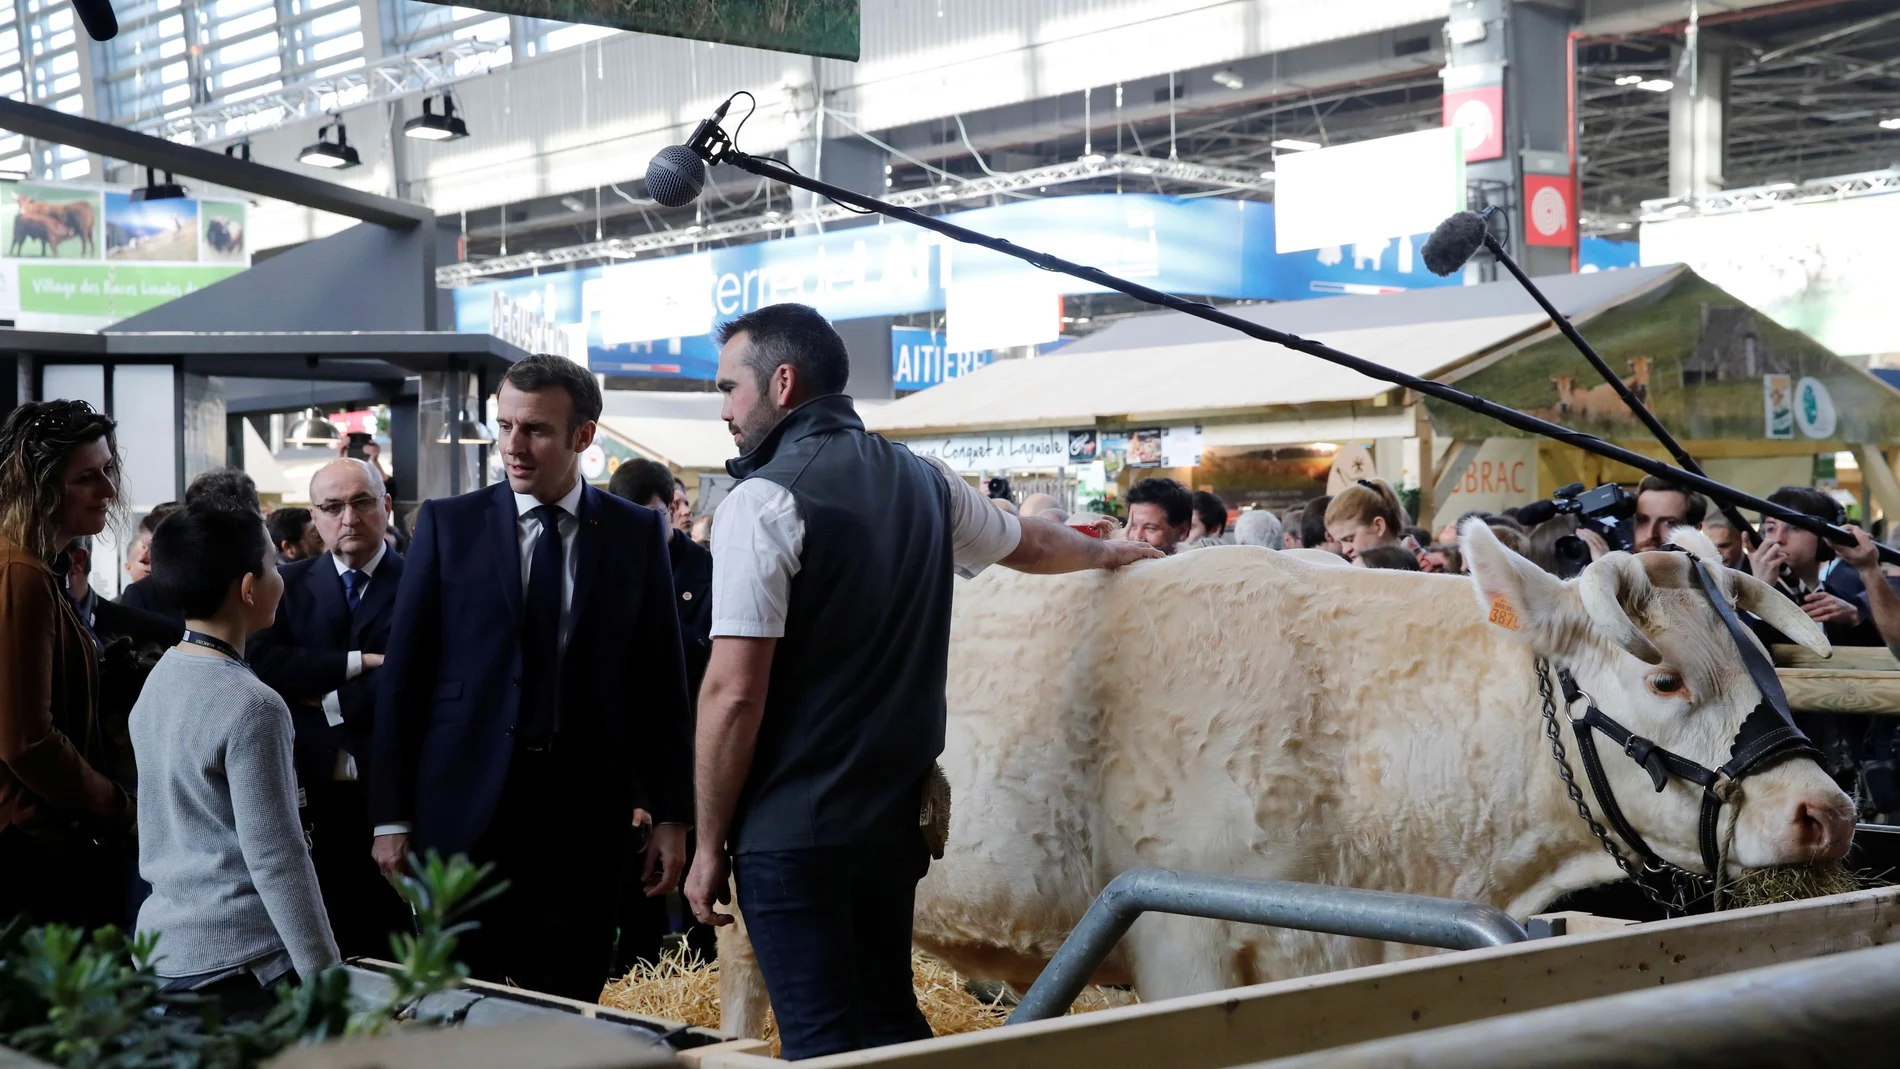 French President Emmanuel Macron speaks with a farmer during a visit to the 57th International Agriculture Fair (Salon international de l'Agriculture) at the Porte de Versailles exhibition center in Paris